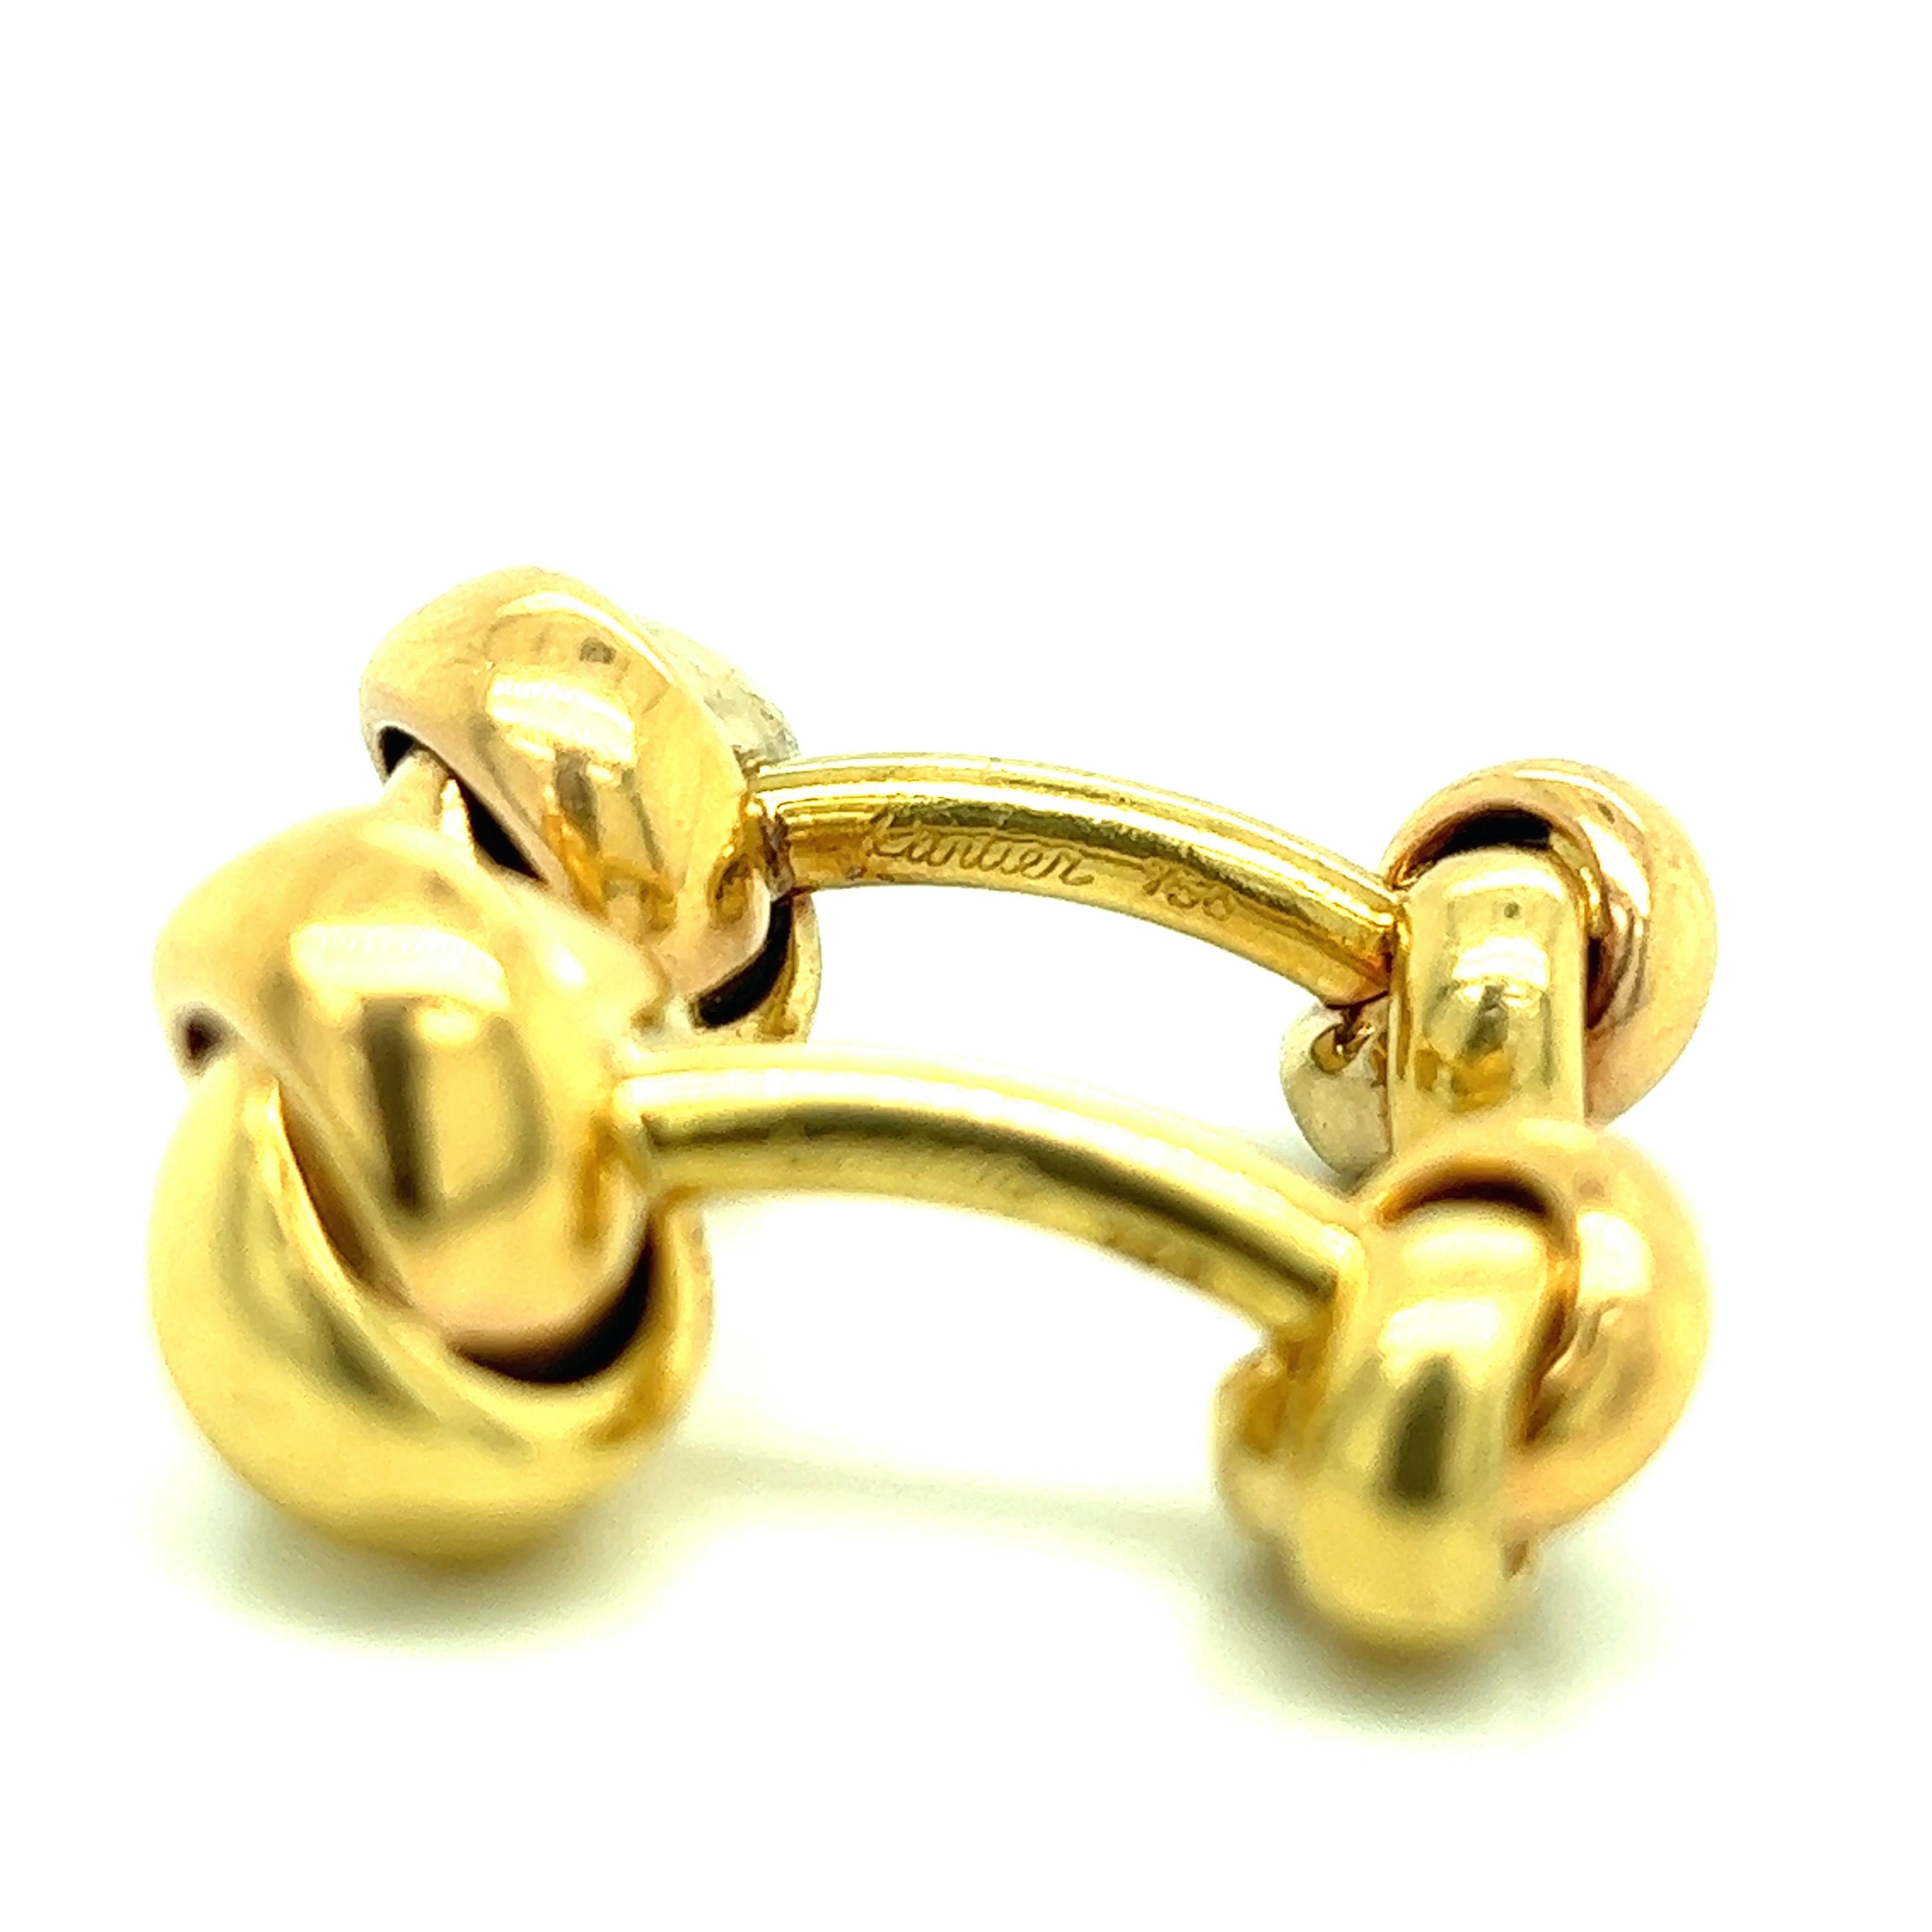 Cartier Gold Cufflinks In Excellent Condition For Sale In New York, NY